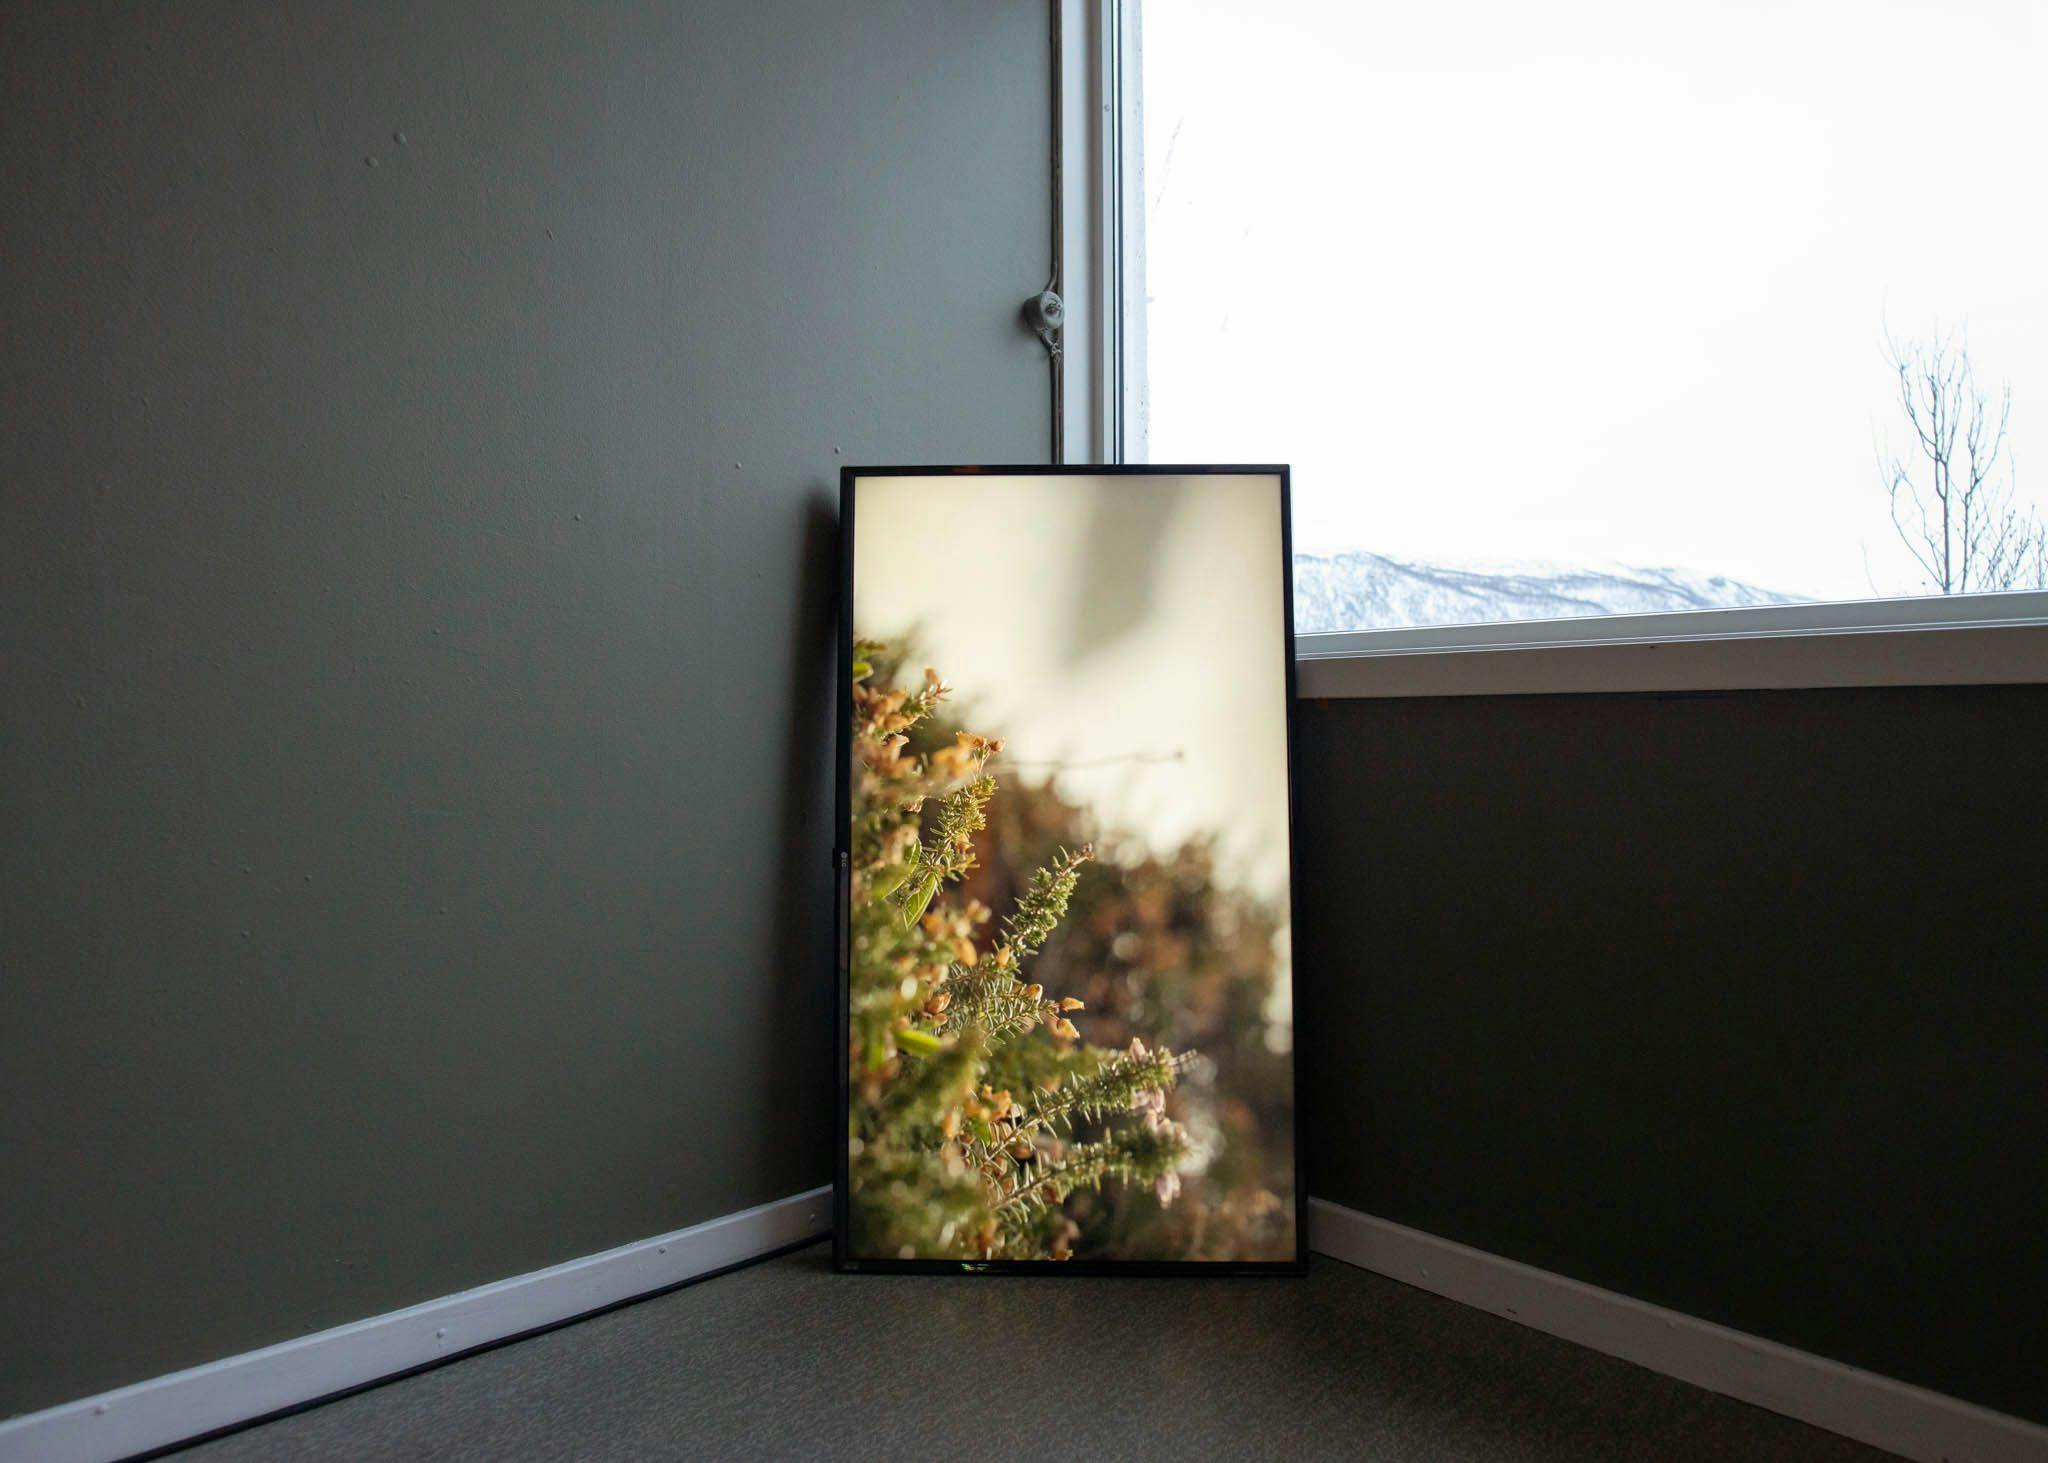 A vertical TV leans in the corner between a wall and a window. The TV displays heather.